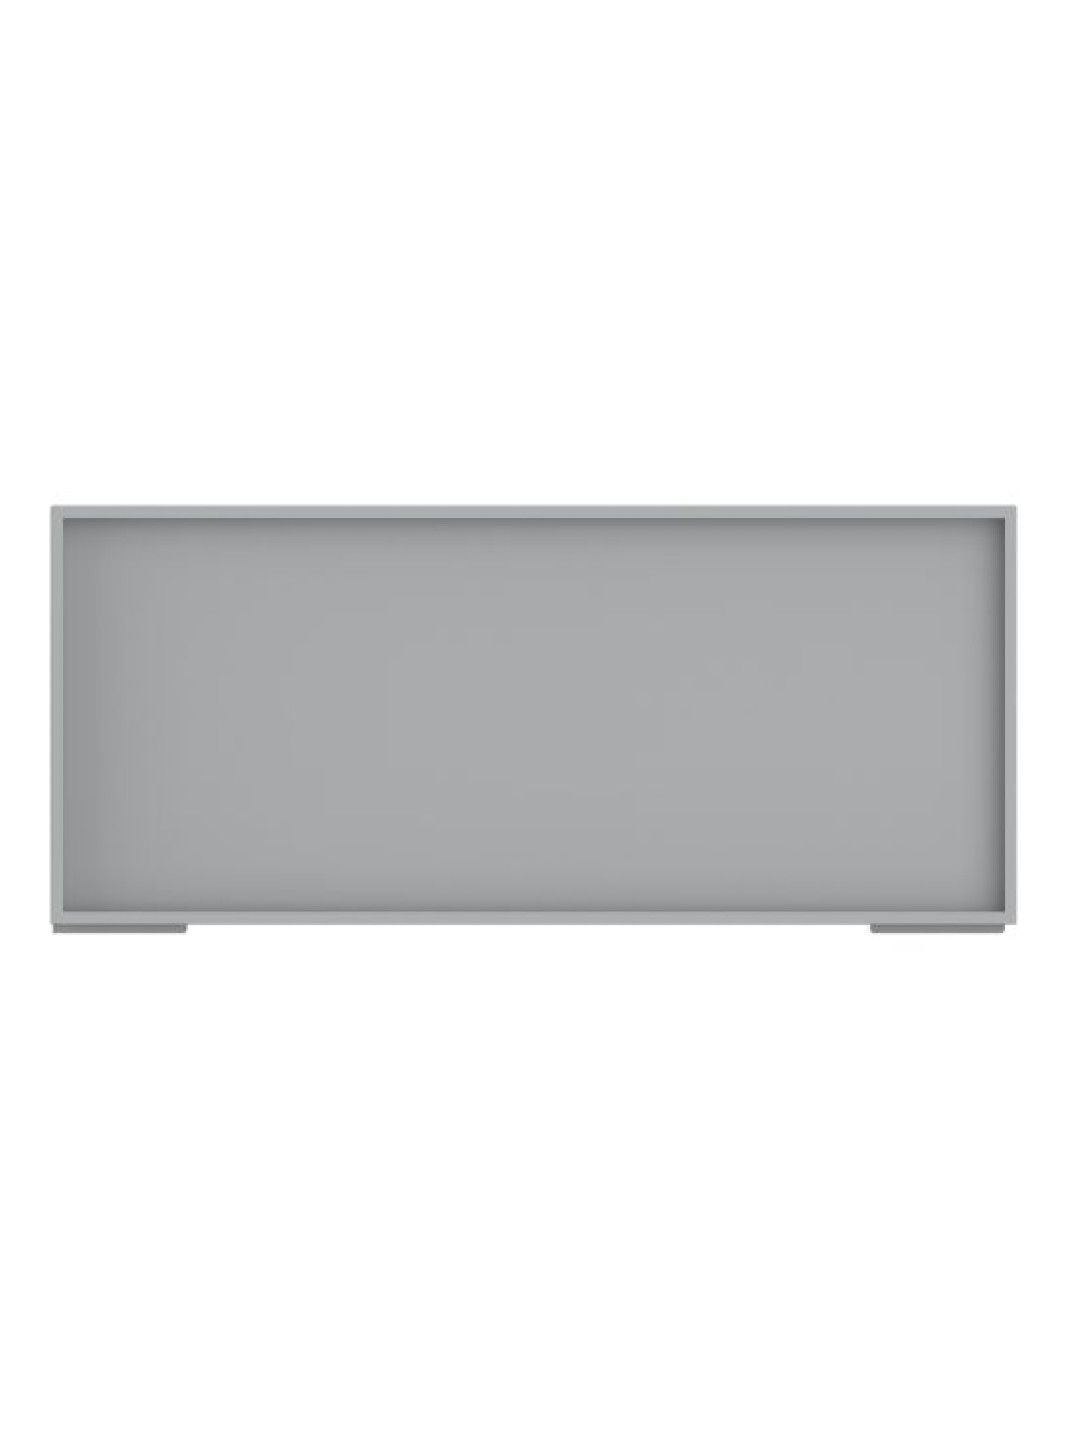 Sunbeams Lifestyle Gray Label Premium Monitor Stand (No Color- Image 3)